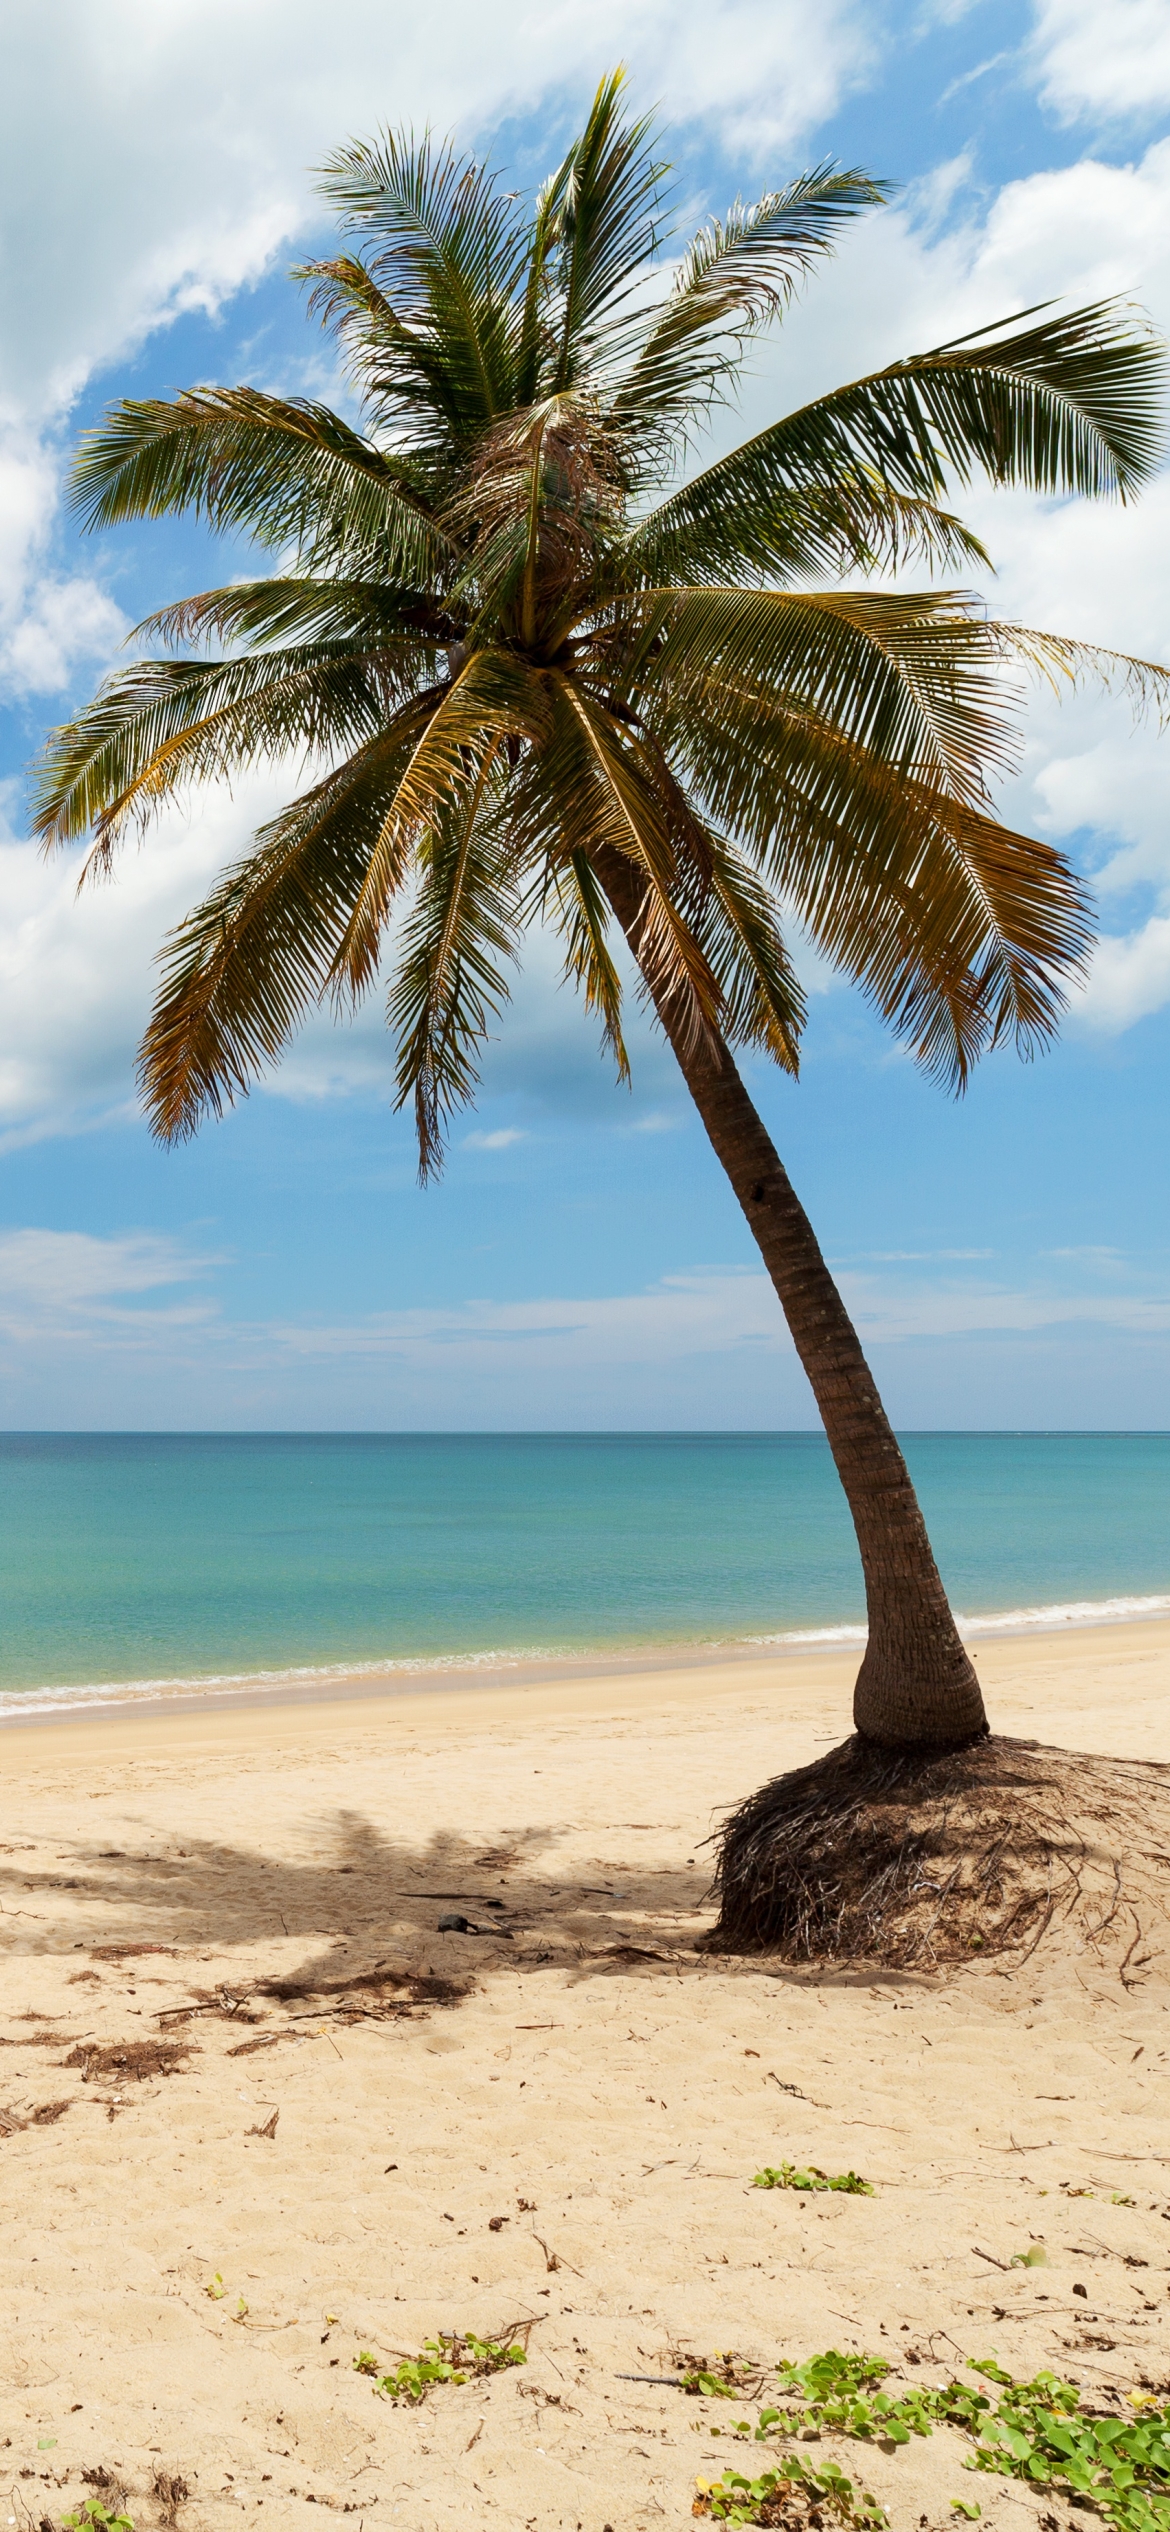 A lonely palm tree on a tropical beach